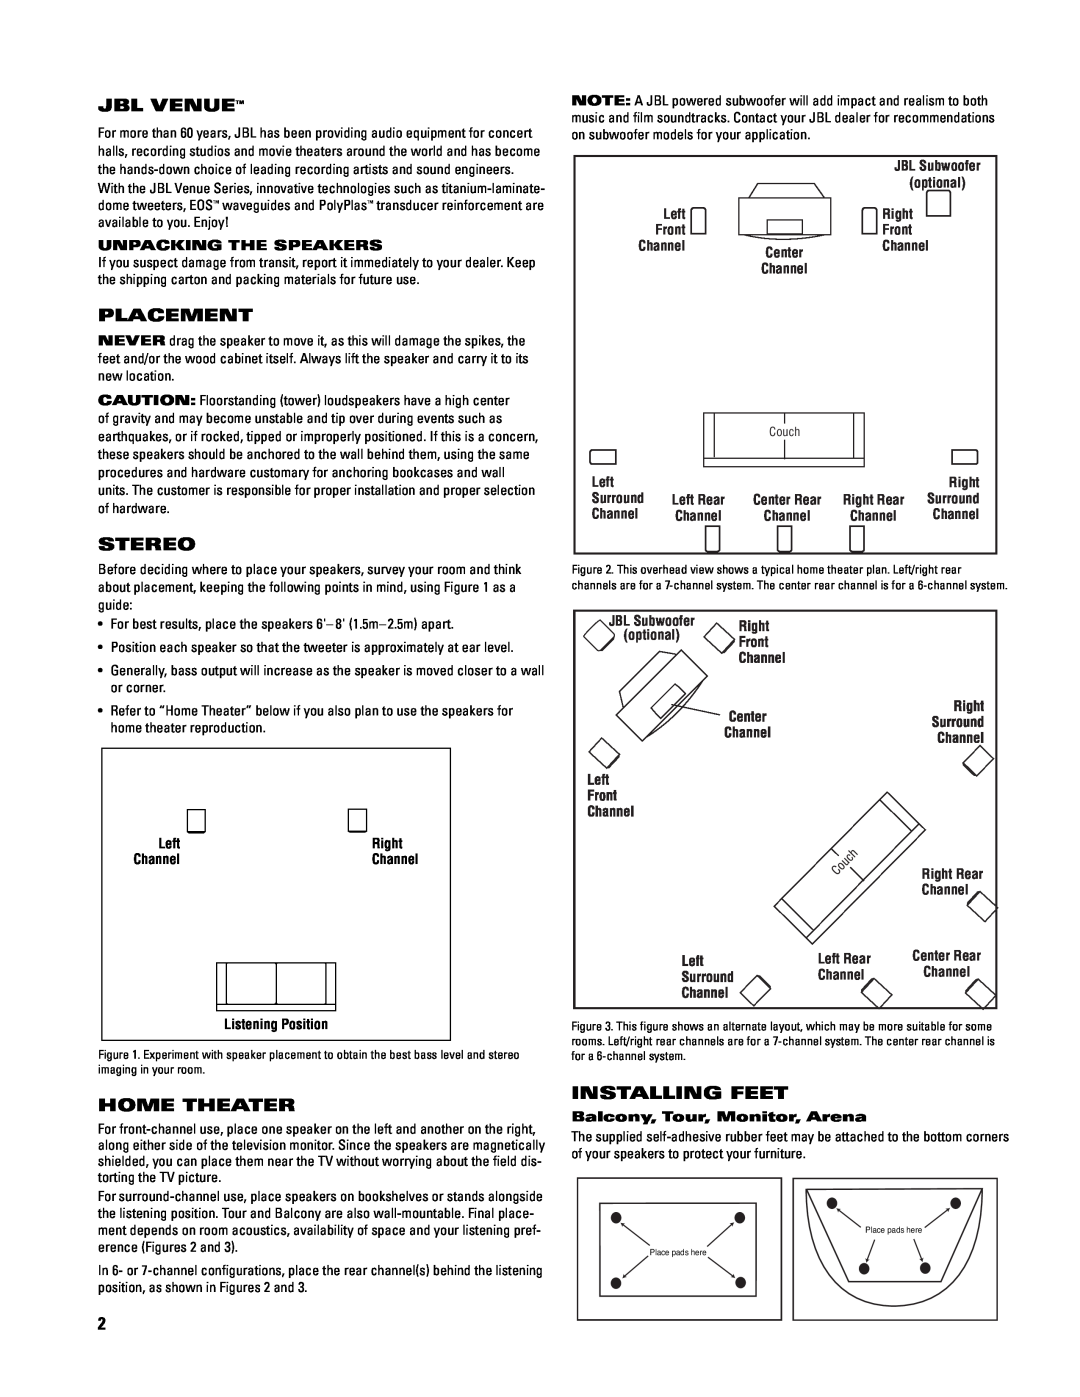 JBL Venue Series manual Jbl Venue, Placement, Stereo, Home Theater, Installing Feet 